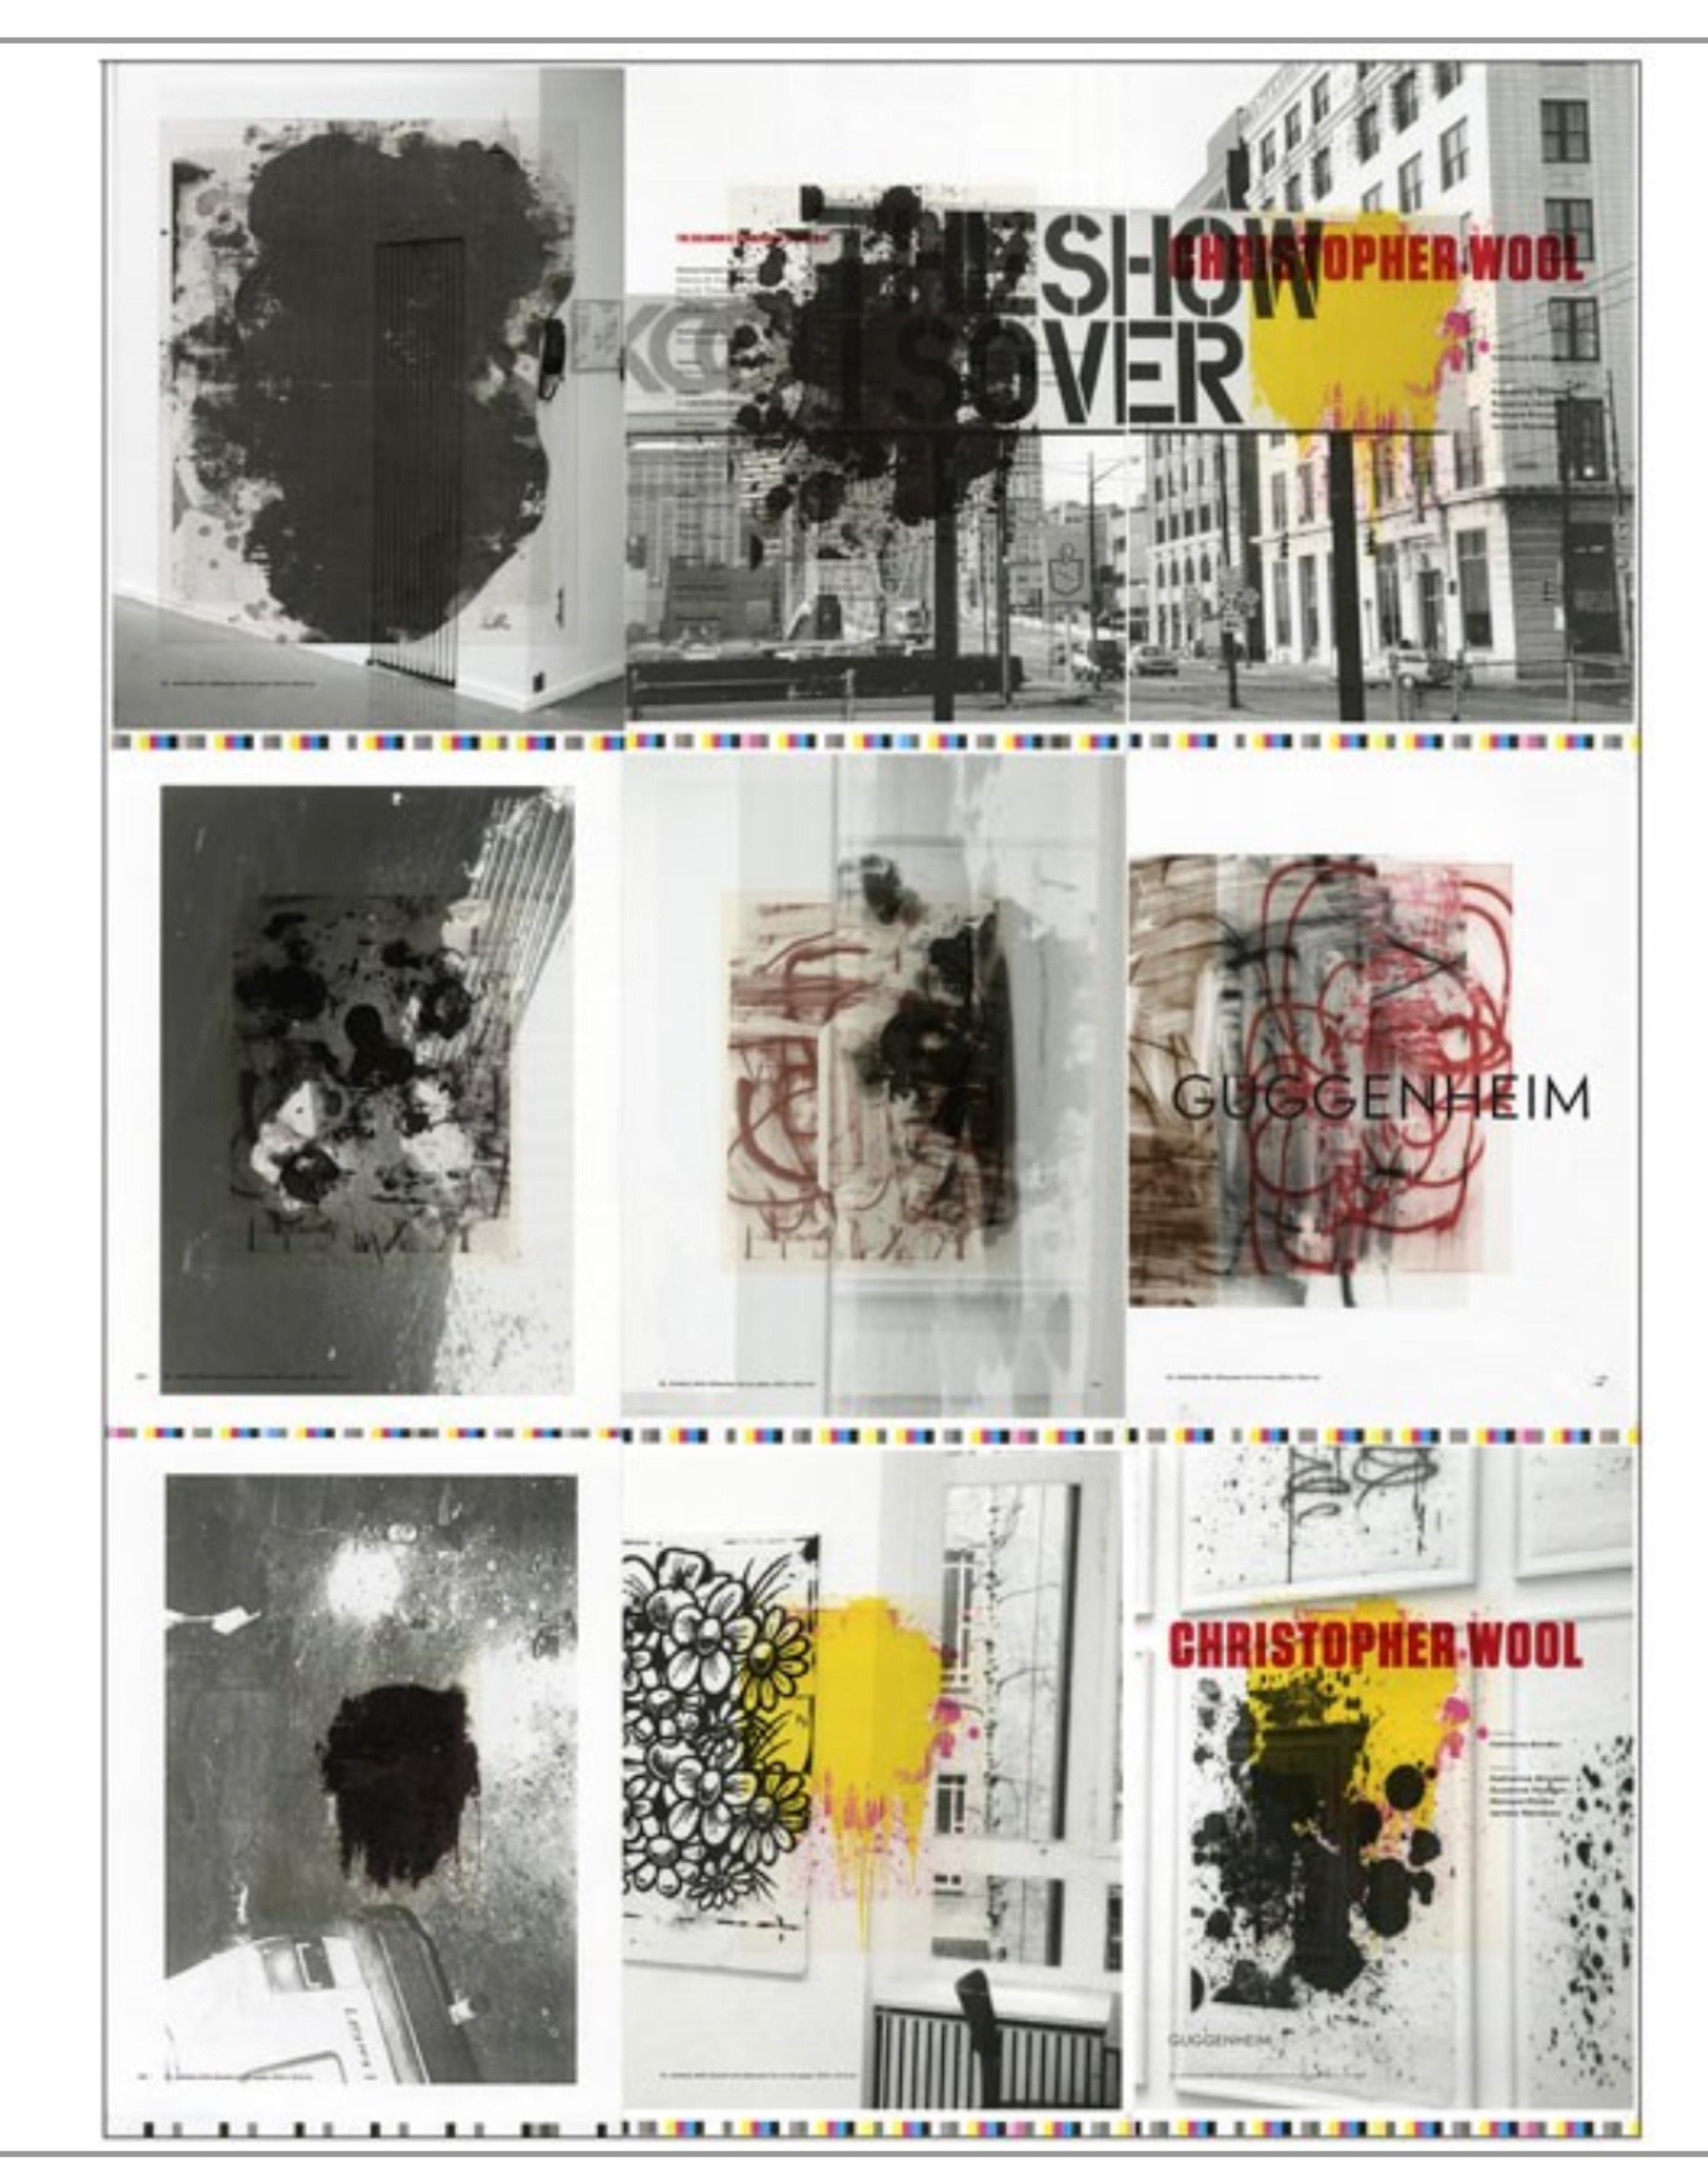 Christopher Wool Figurative Print - "The Show is Over" Guggenheim museum exhibition poster Minimalist Art 33.5 x 25"